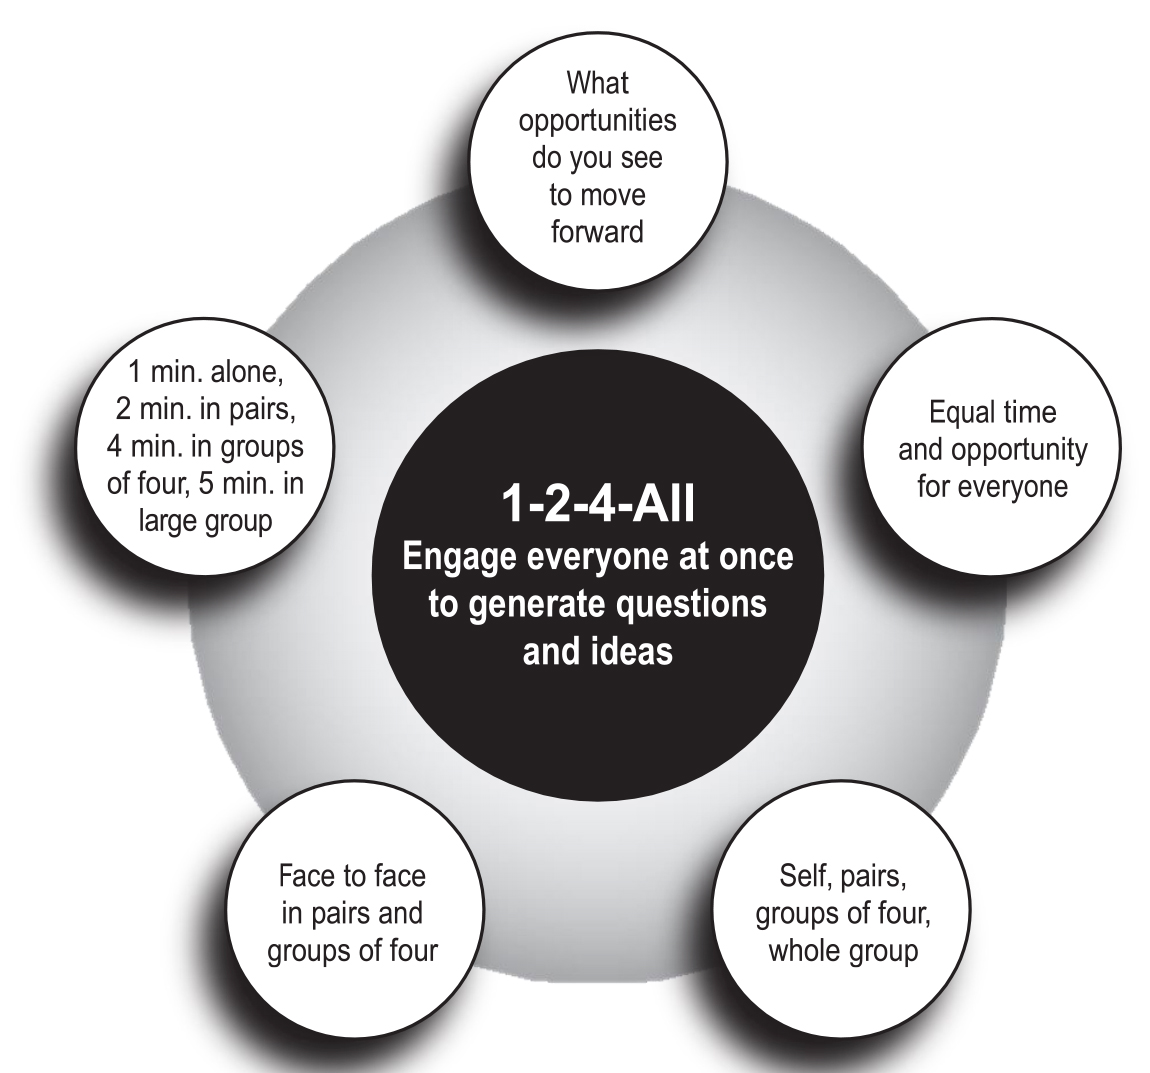 1-2-4-All: Engage everyone at once to generate questions and ideas: description follows